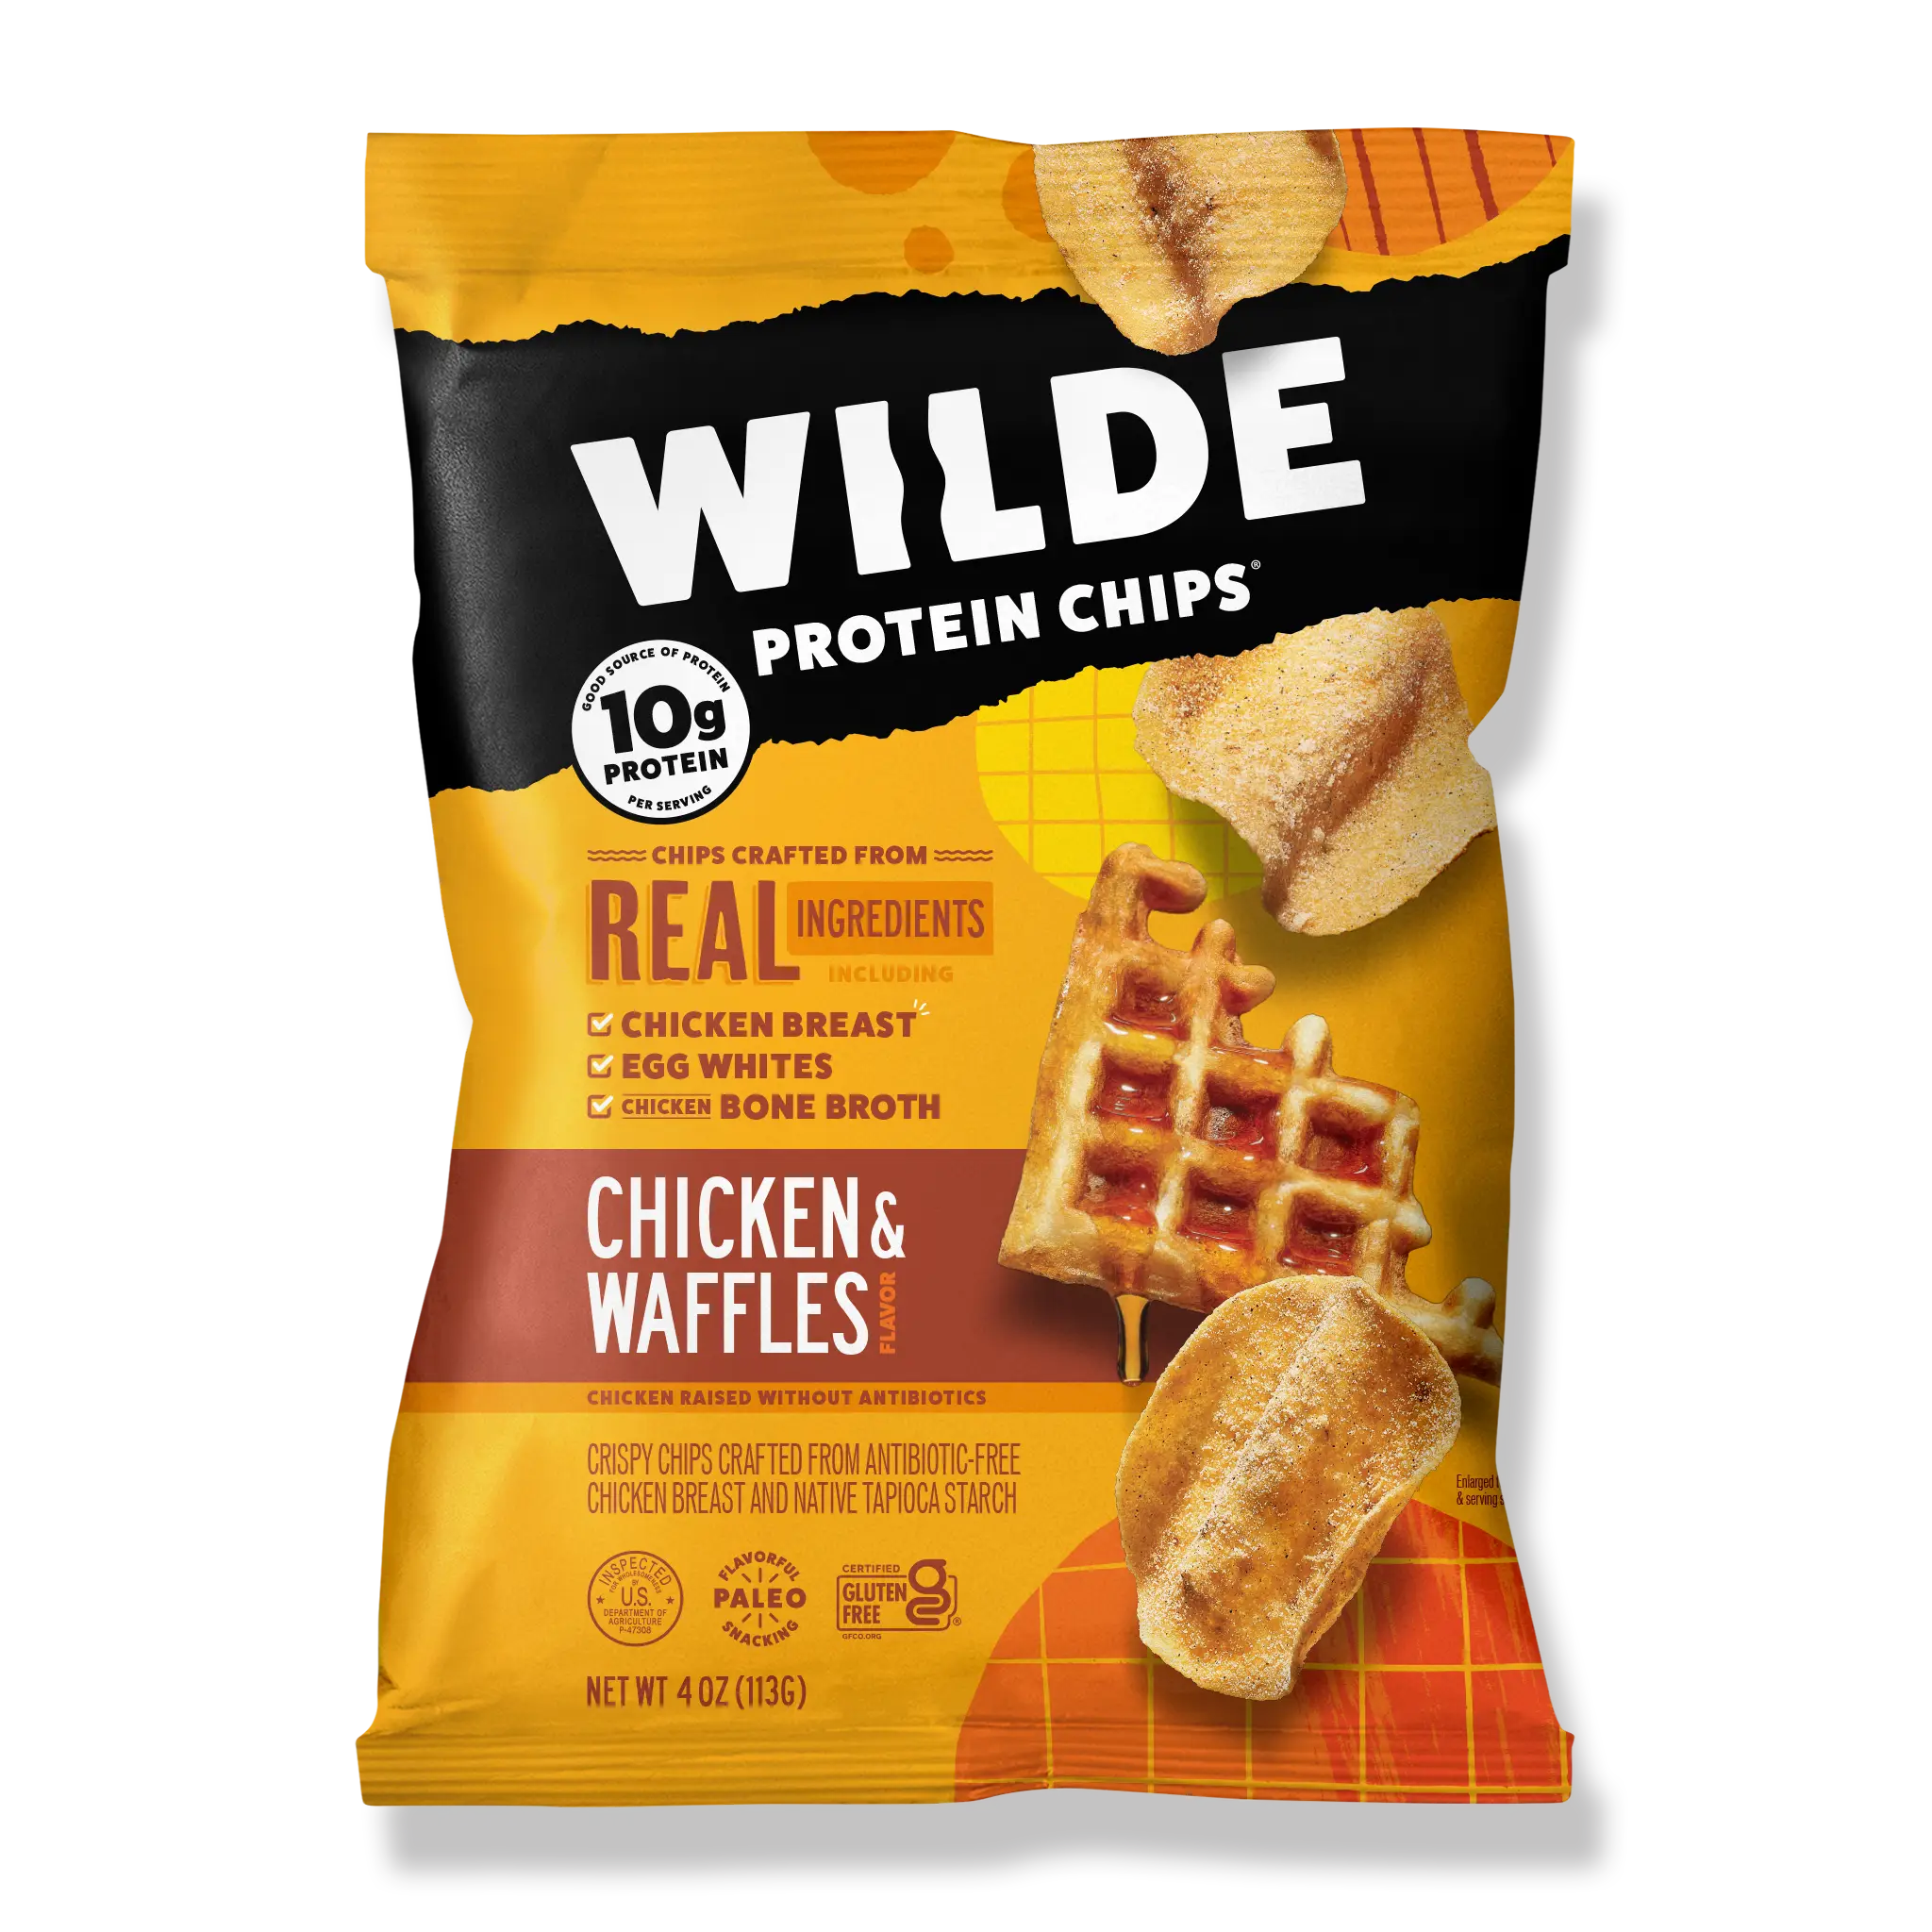 Buffalo Style WILDE Chips - Tangy & Spicy: Protein Chips Made From 